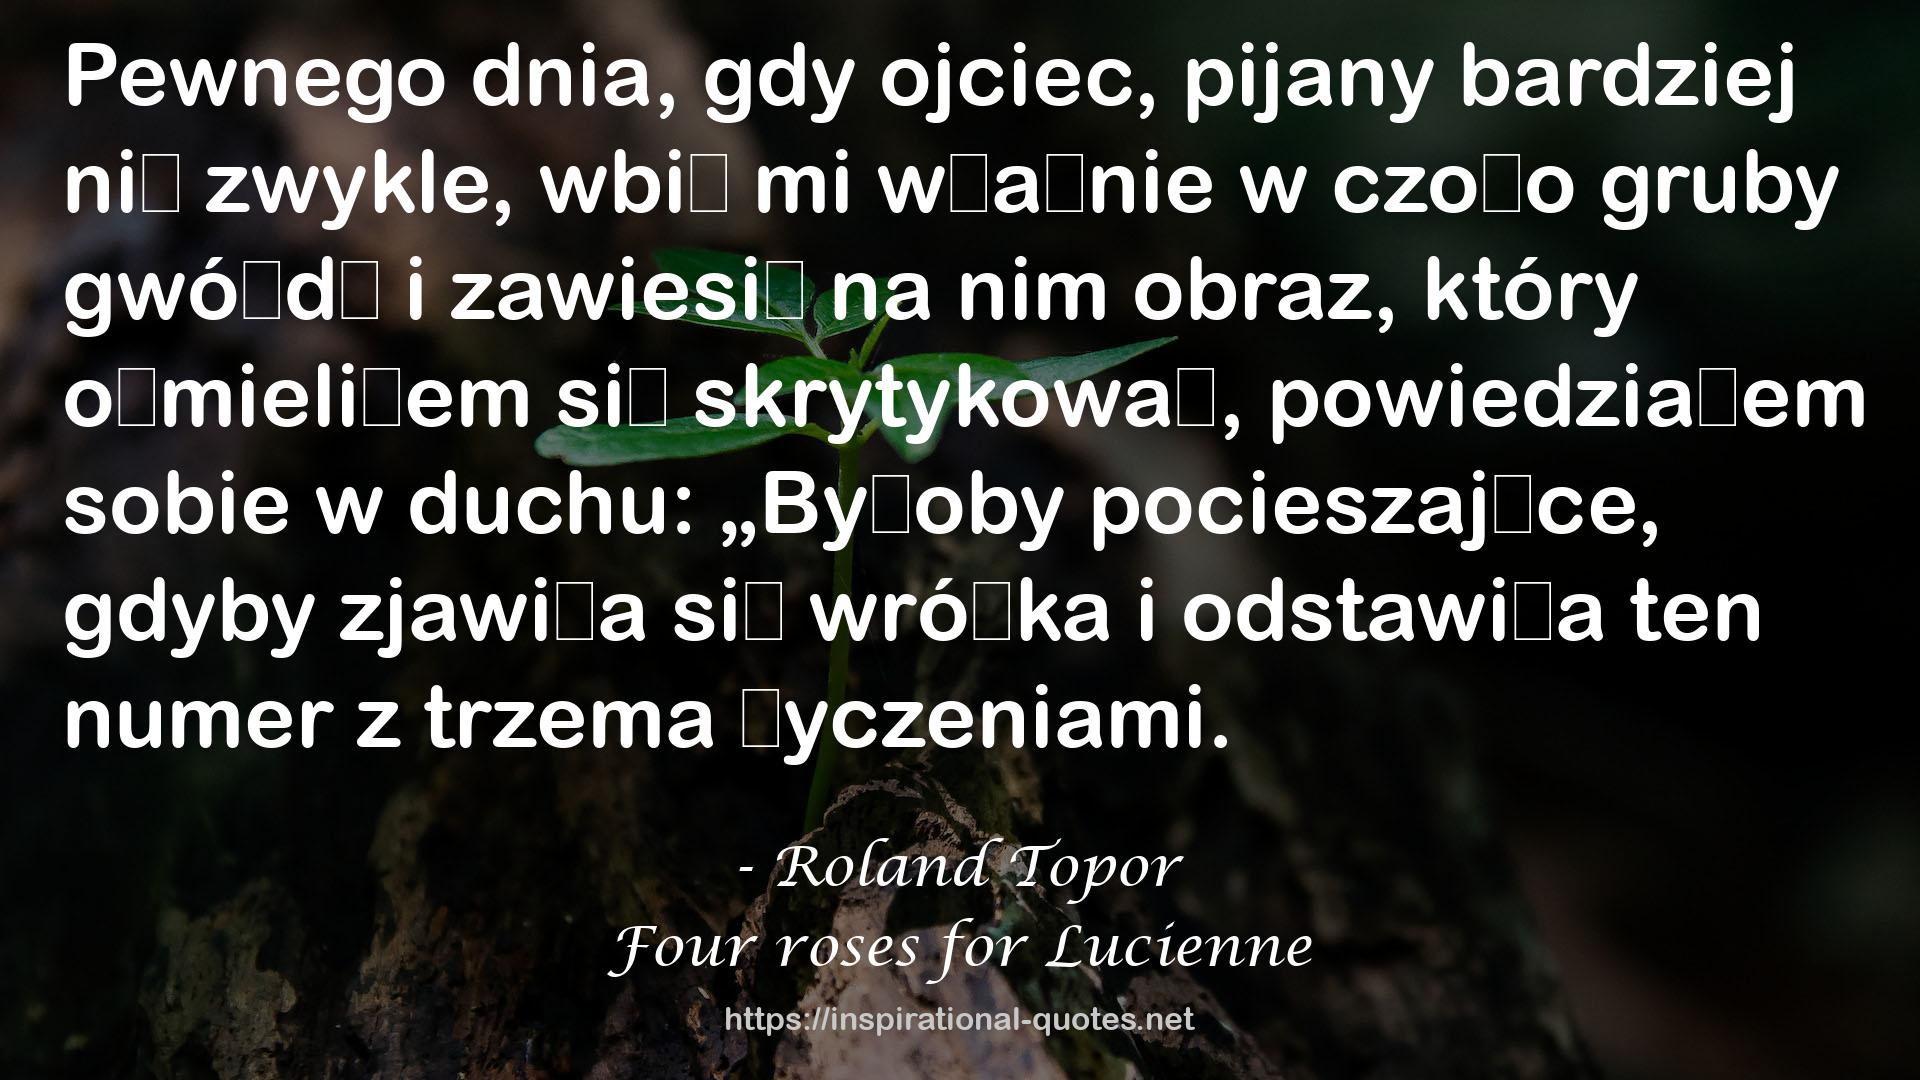 Four roses for Lucienne QUOTES